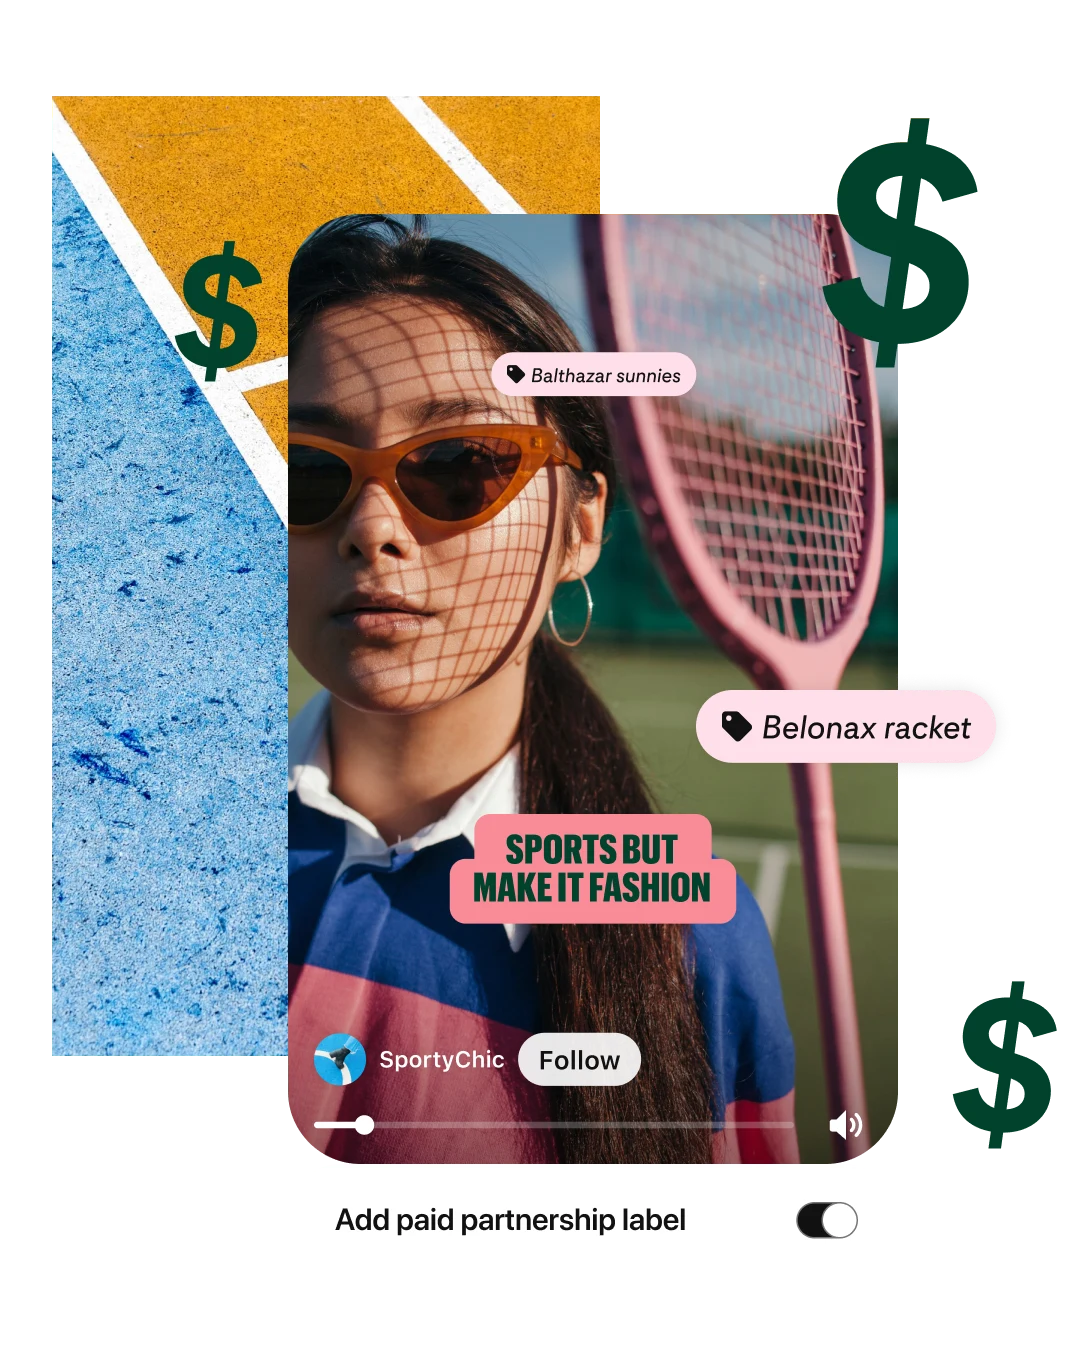 Still image from a Video pin of an Asian woman posed to camera with a pink tennis racquet and matching sunglasses, titled “Sports but make it fashion”.